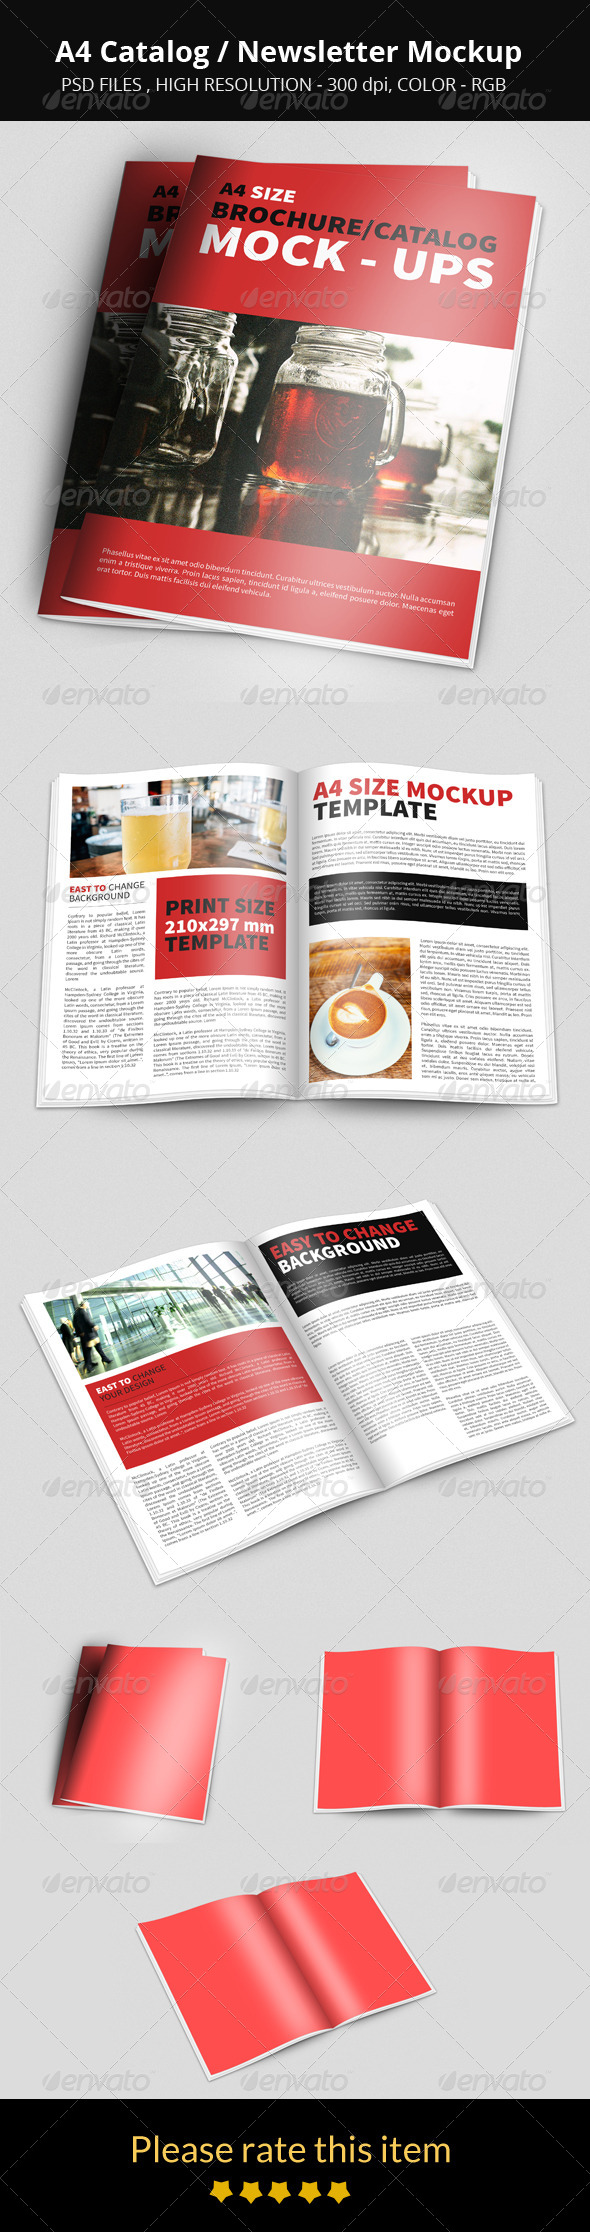 Download A4 Catalog Newsletter Mockup By Mehedi Hasan Graphicriver